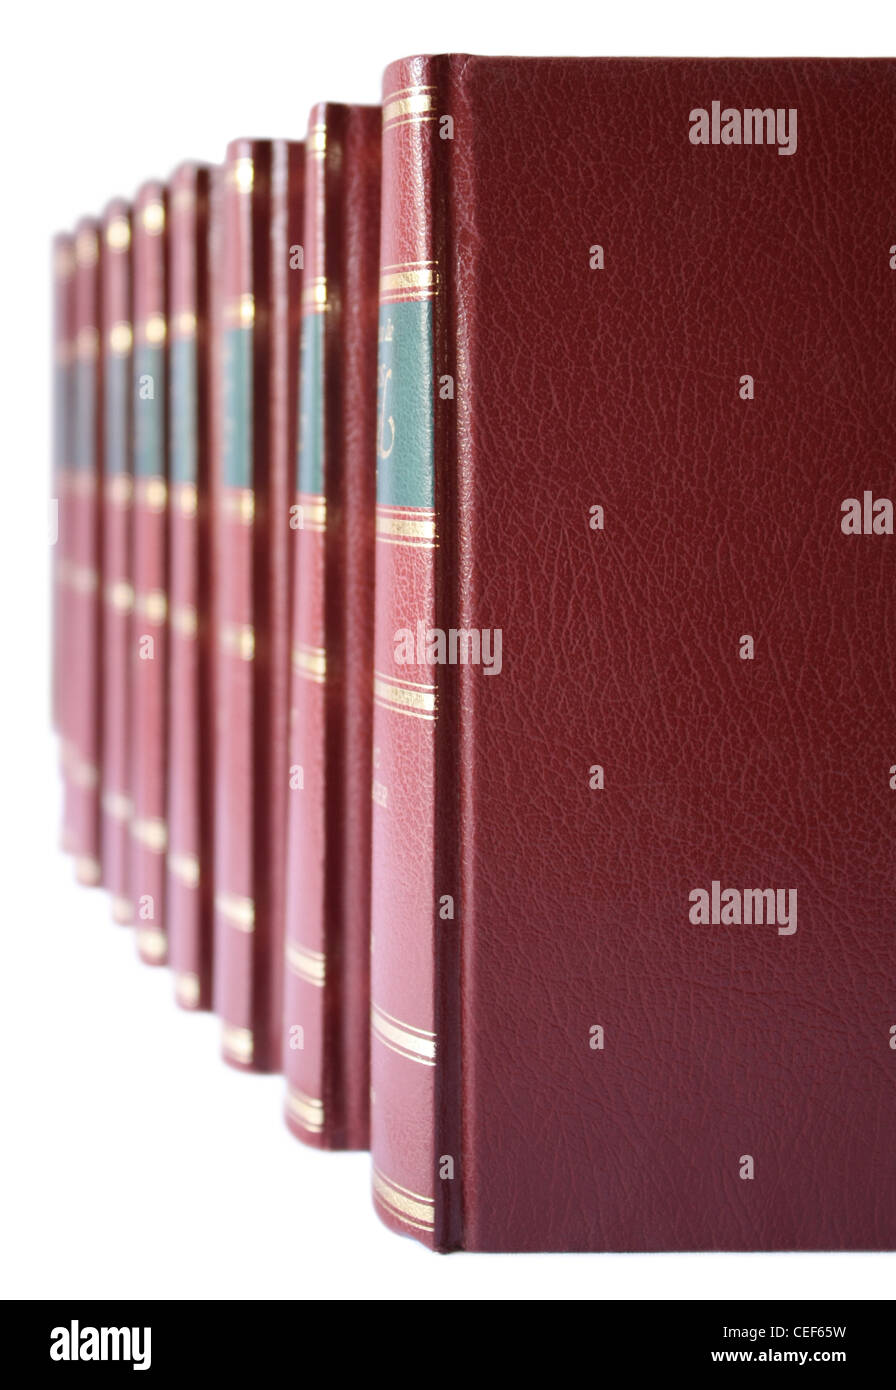 Row of books with red leather hard cover on a white background. Stock Photo